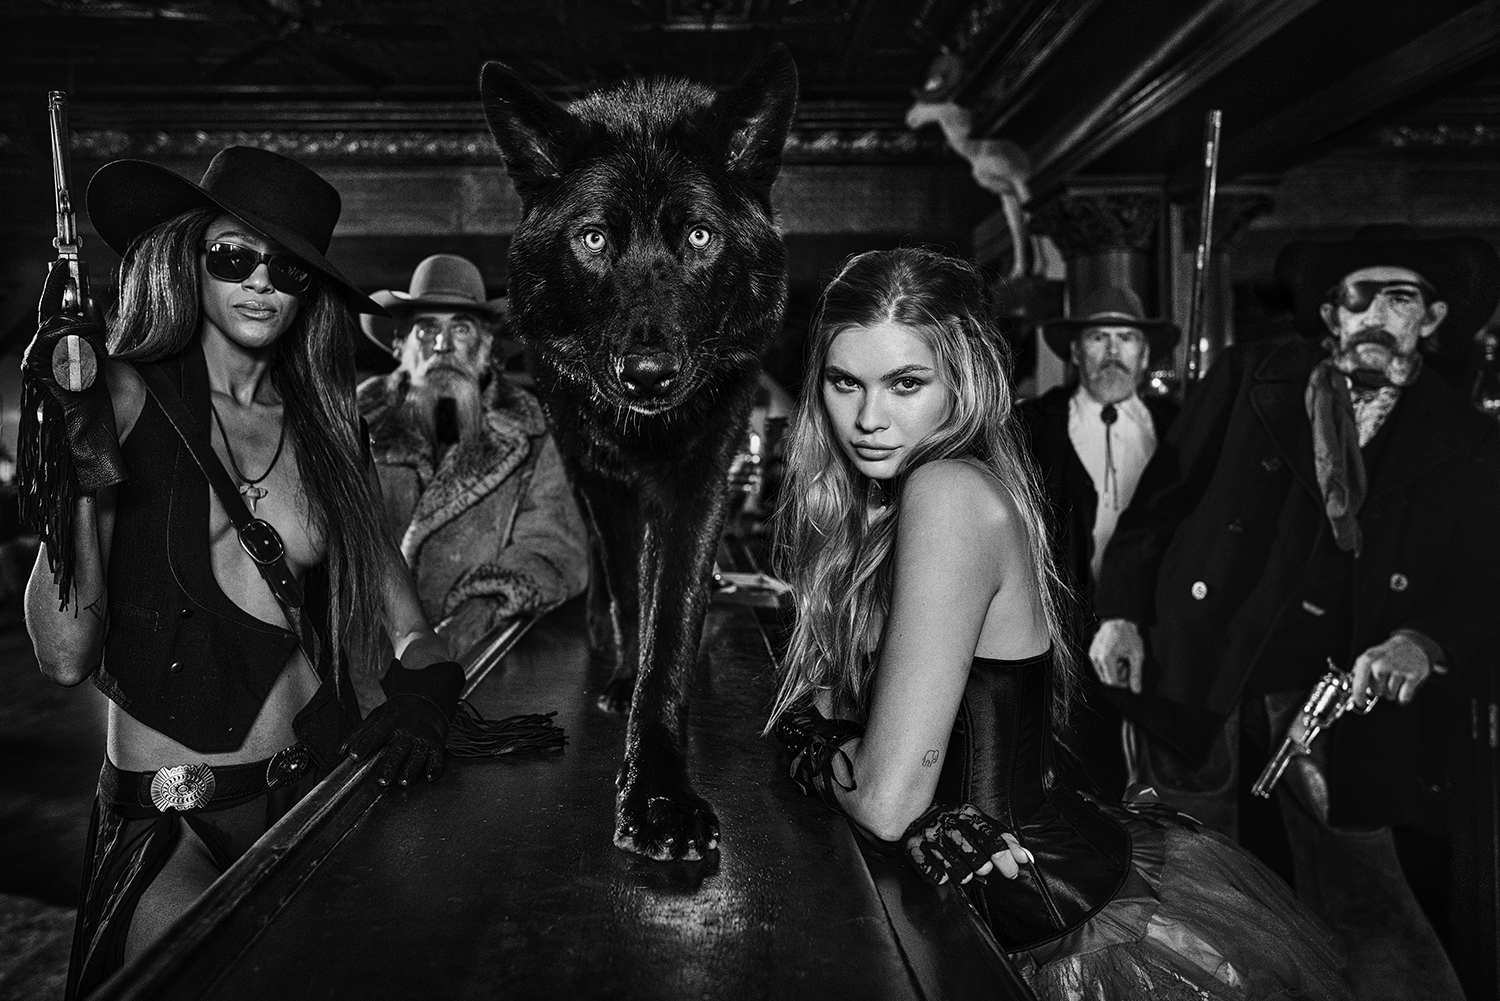 The photo "The Residents" by David Yarrow is a black and white Wild West image with a wolf on a bar and female and male actors dressed in cowboy attire in the background